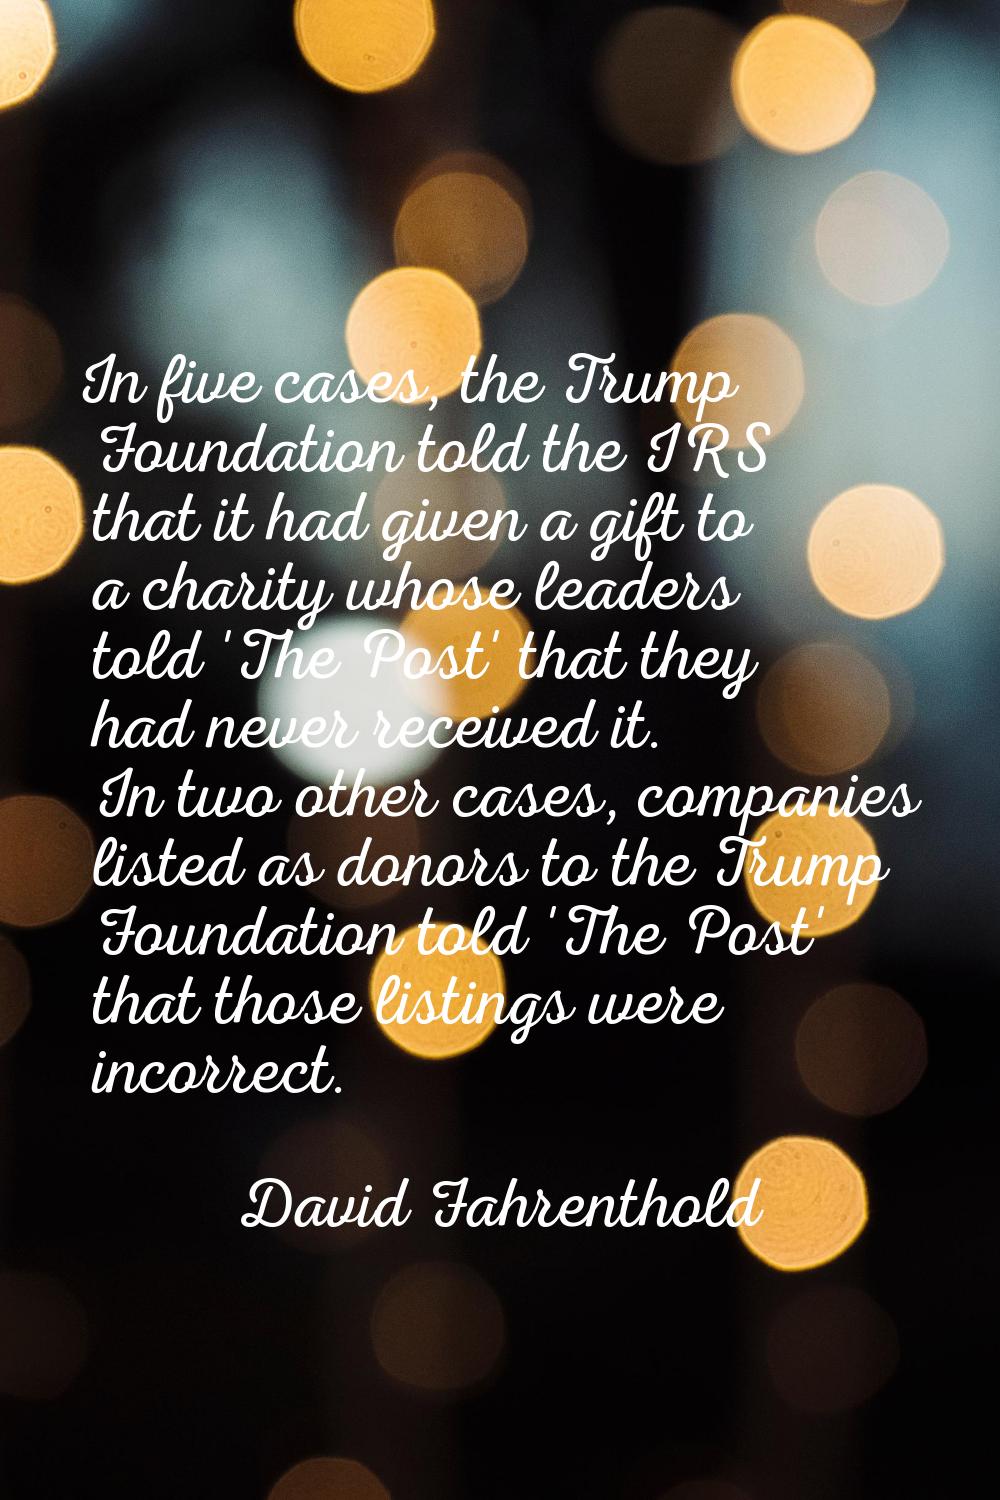 In five cases, the Trump Foundation told the IRS that it had given a gift to a charity whose leader